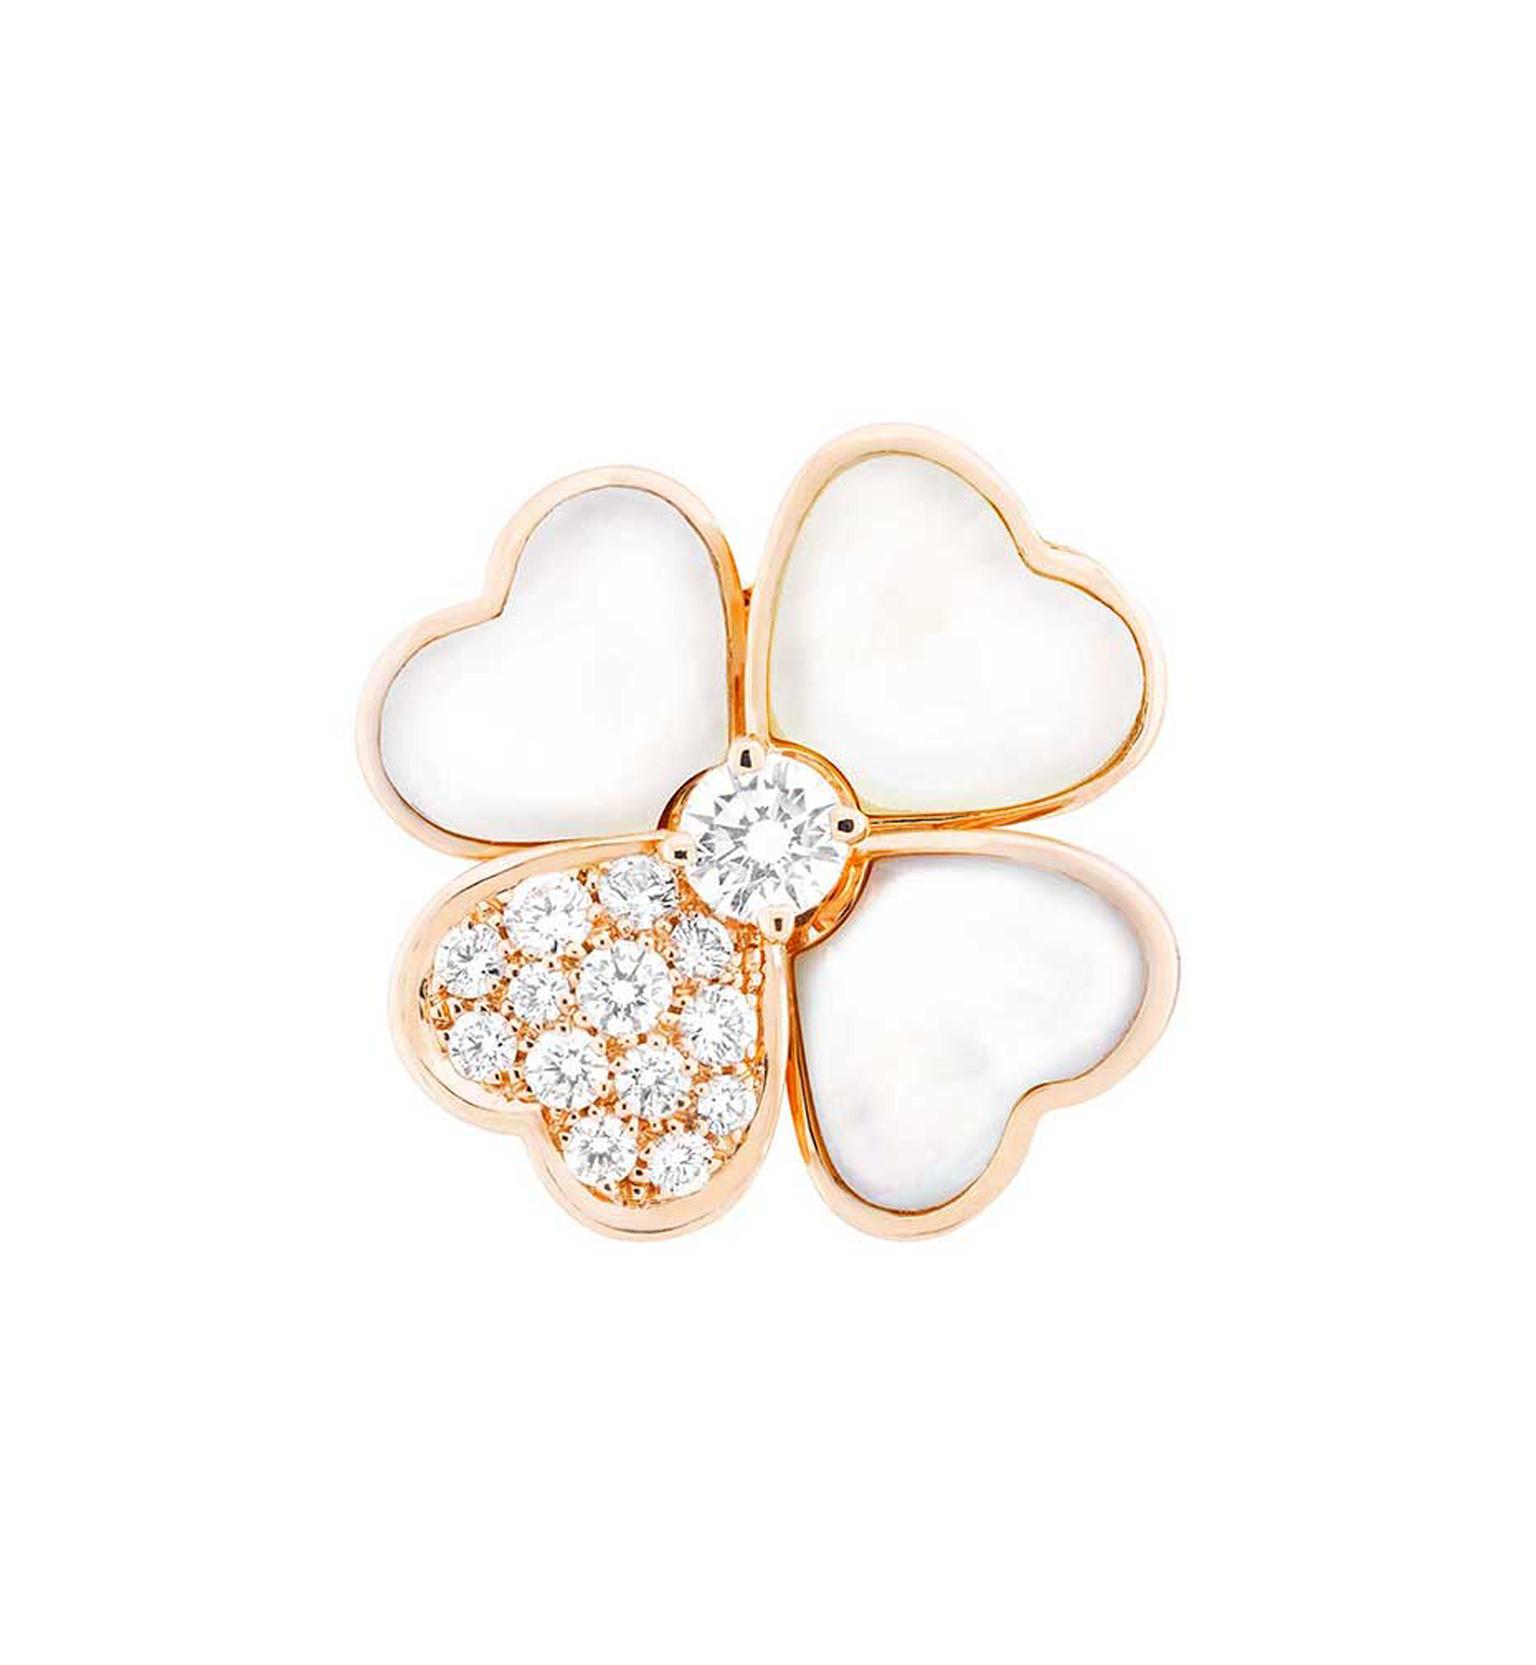 Van Cleef & Arpels' new Cosmos pendant in rose gold, with a